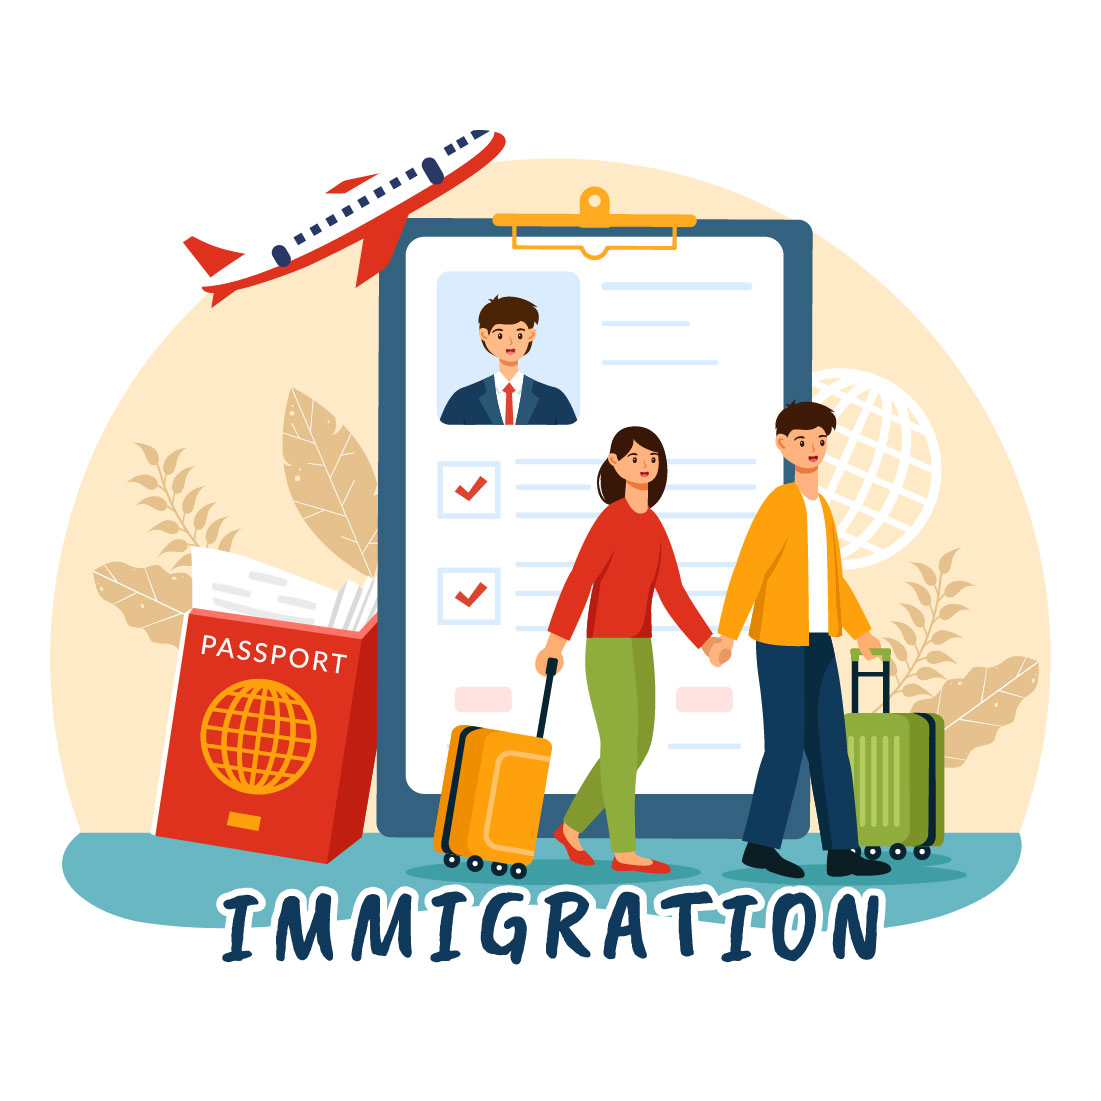 9 Immigration Vector Illustration cover image.